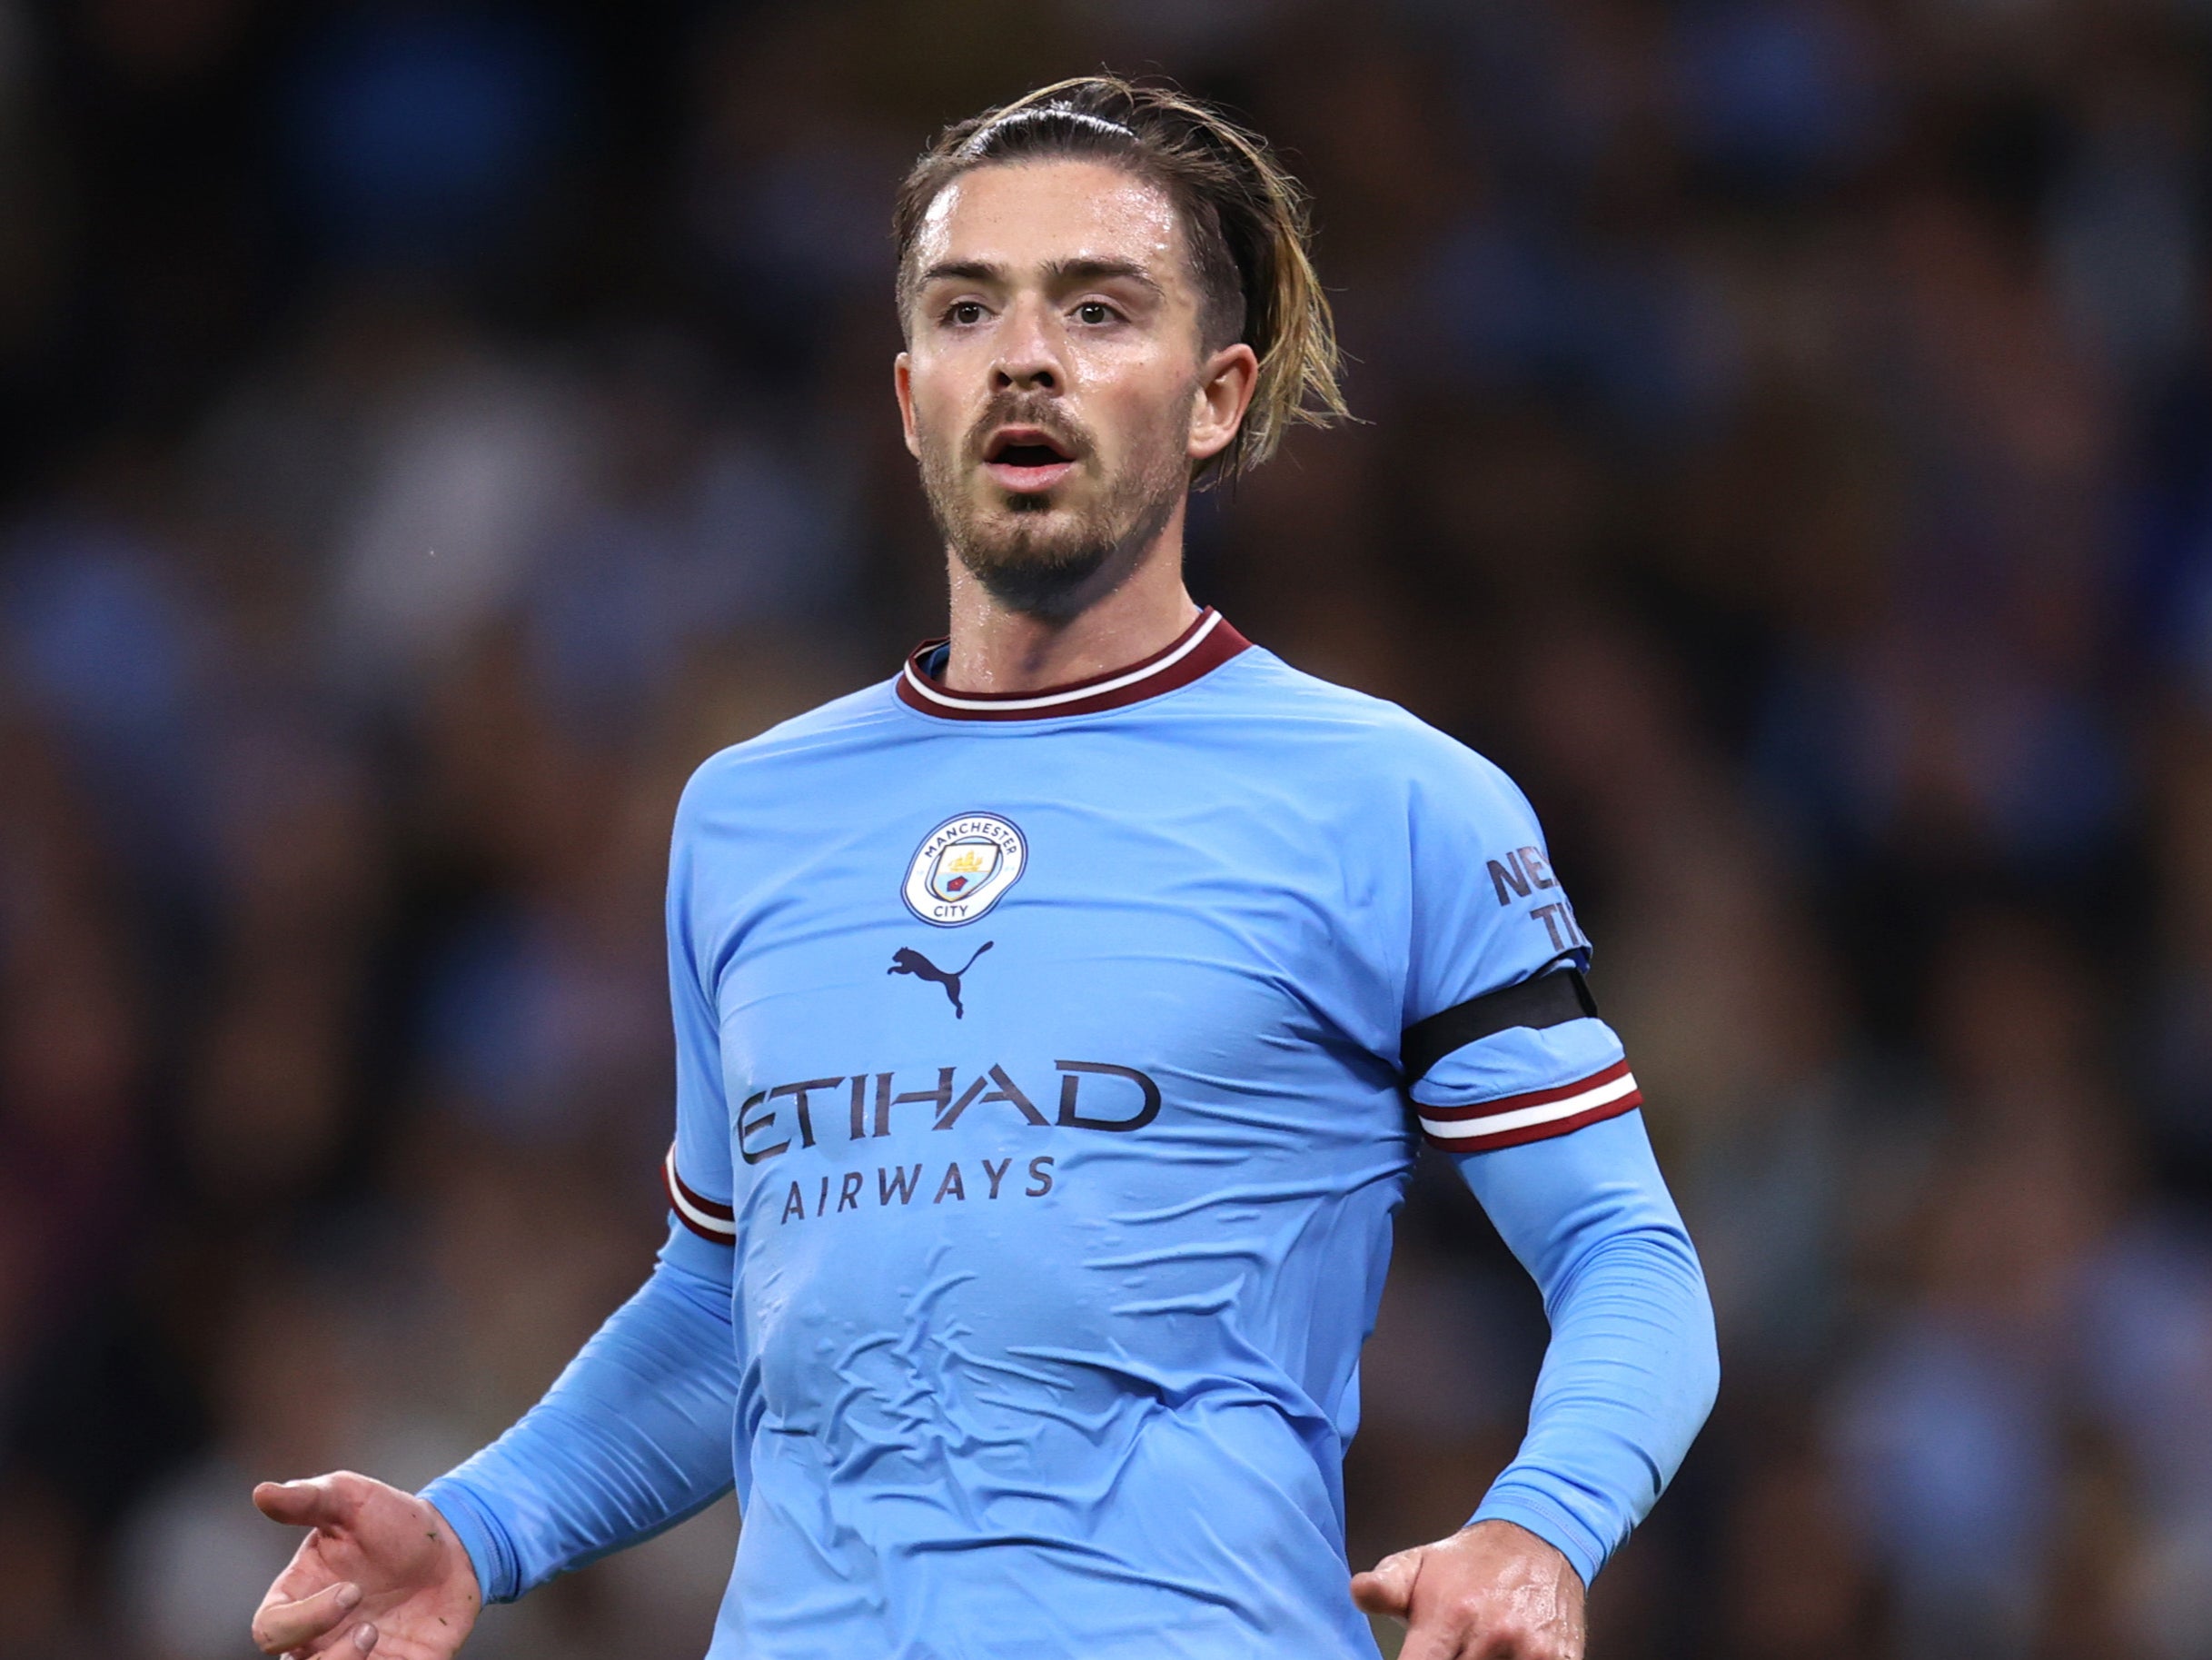 Manchester City winger Jack Grealish is yet to score this season